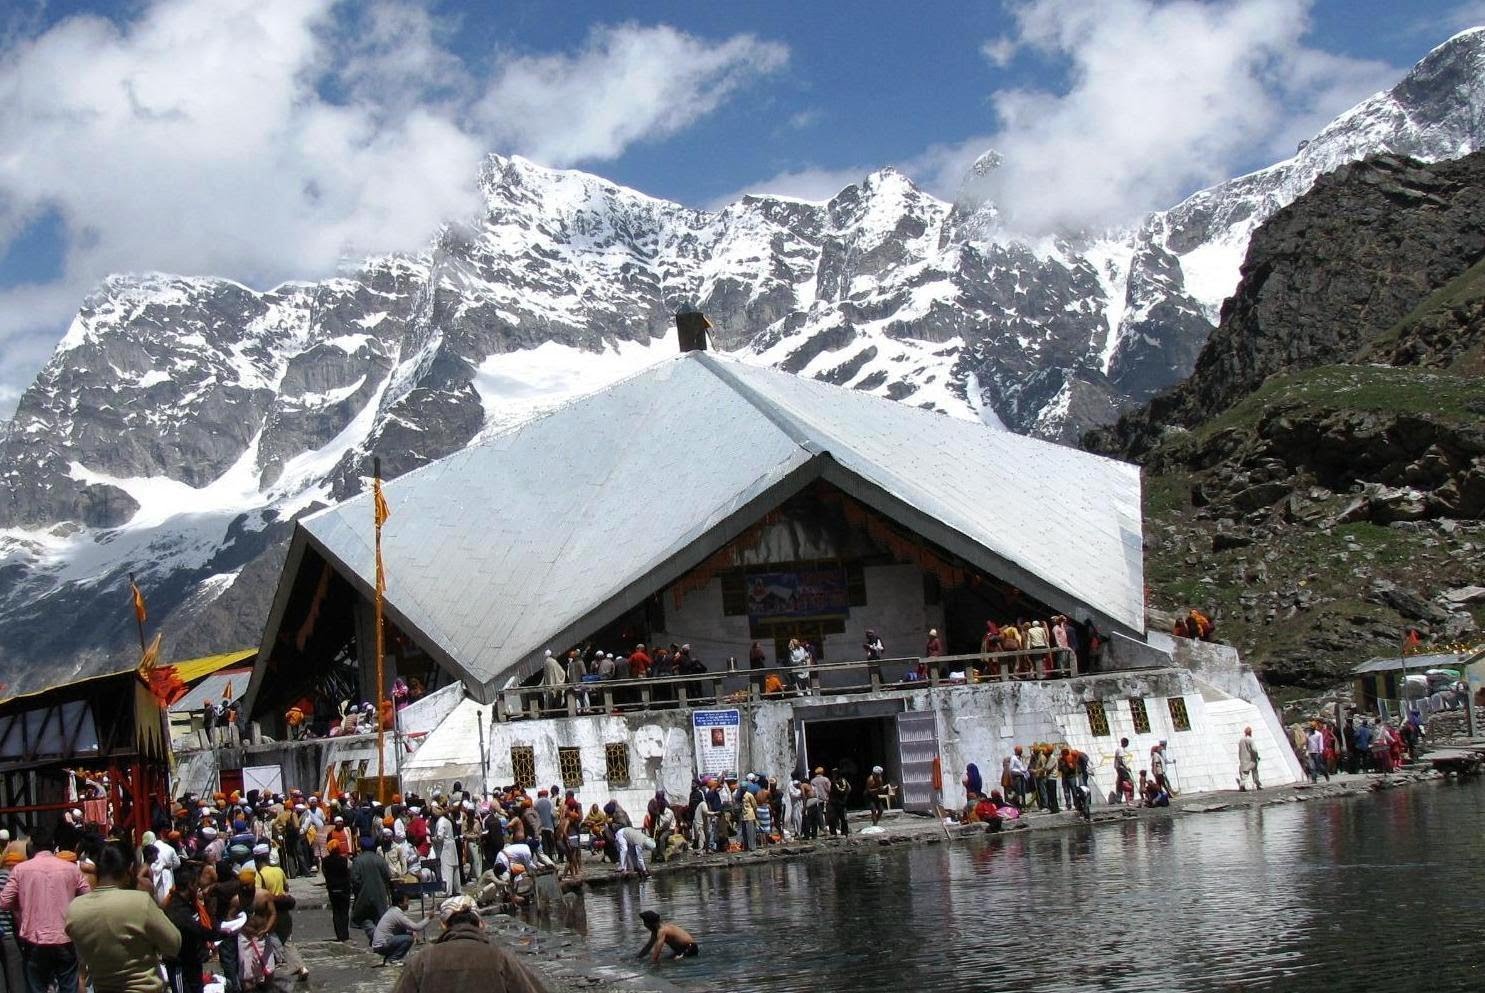 Book a tour package for Hemkund sahib pilgrim for an amazing experience